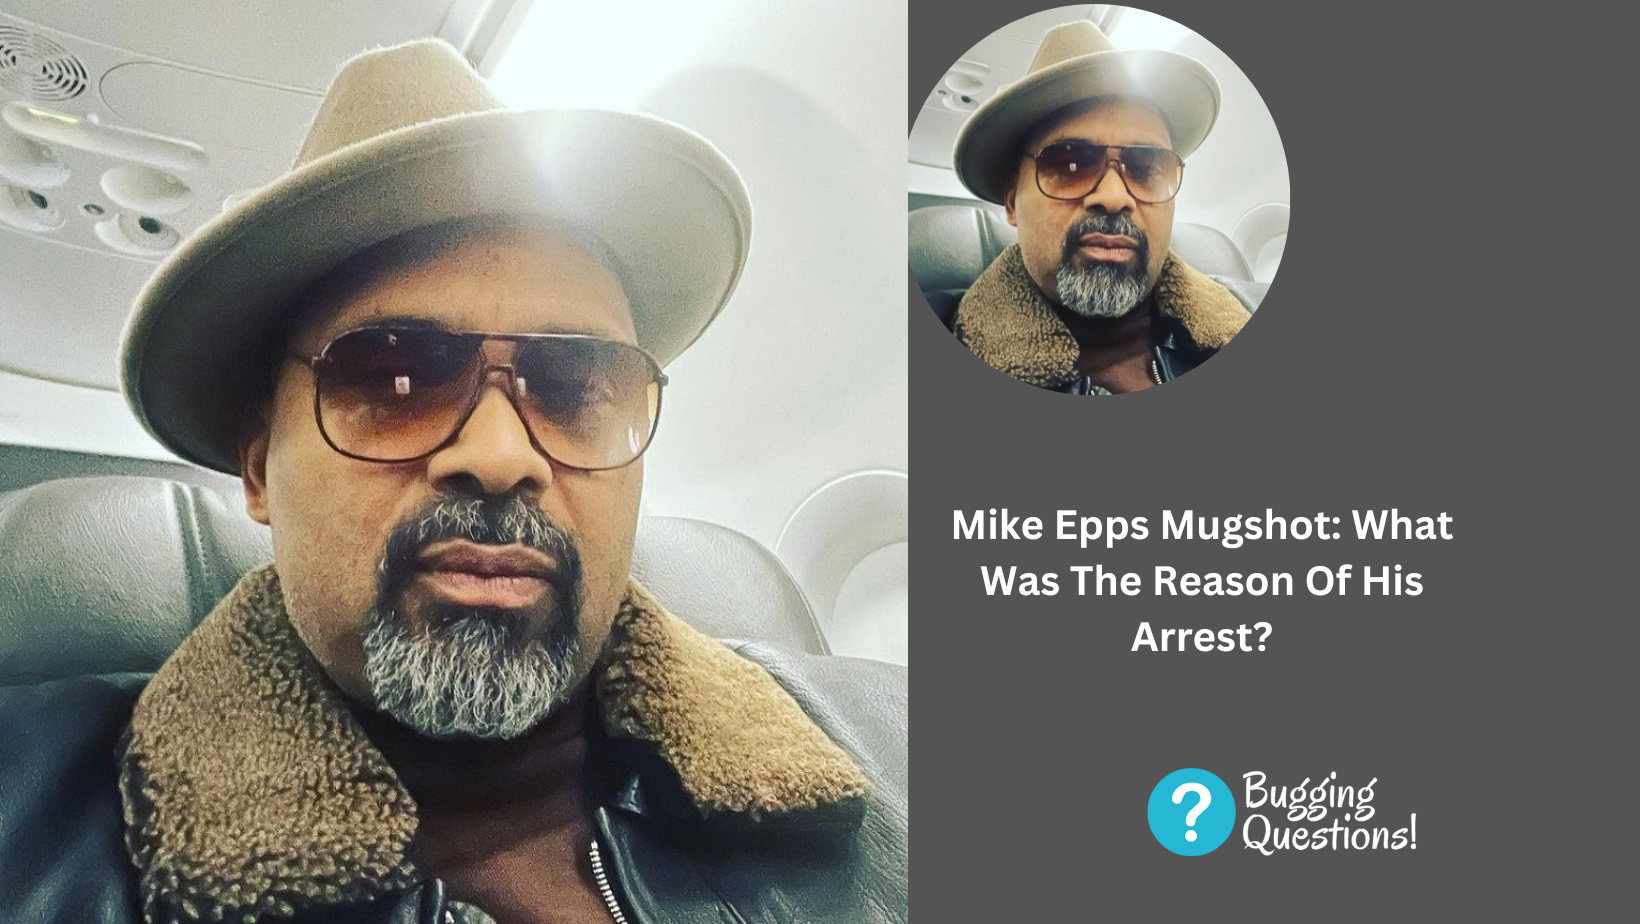 Mike Epps Mugshot: What Was The Reason Of His Arrest?